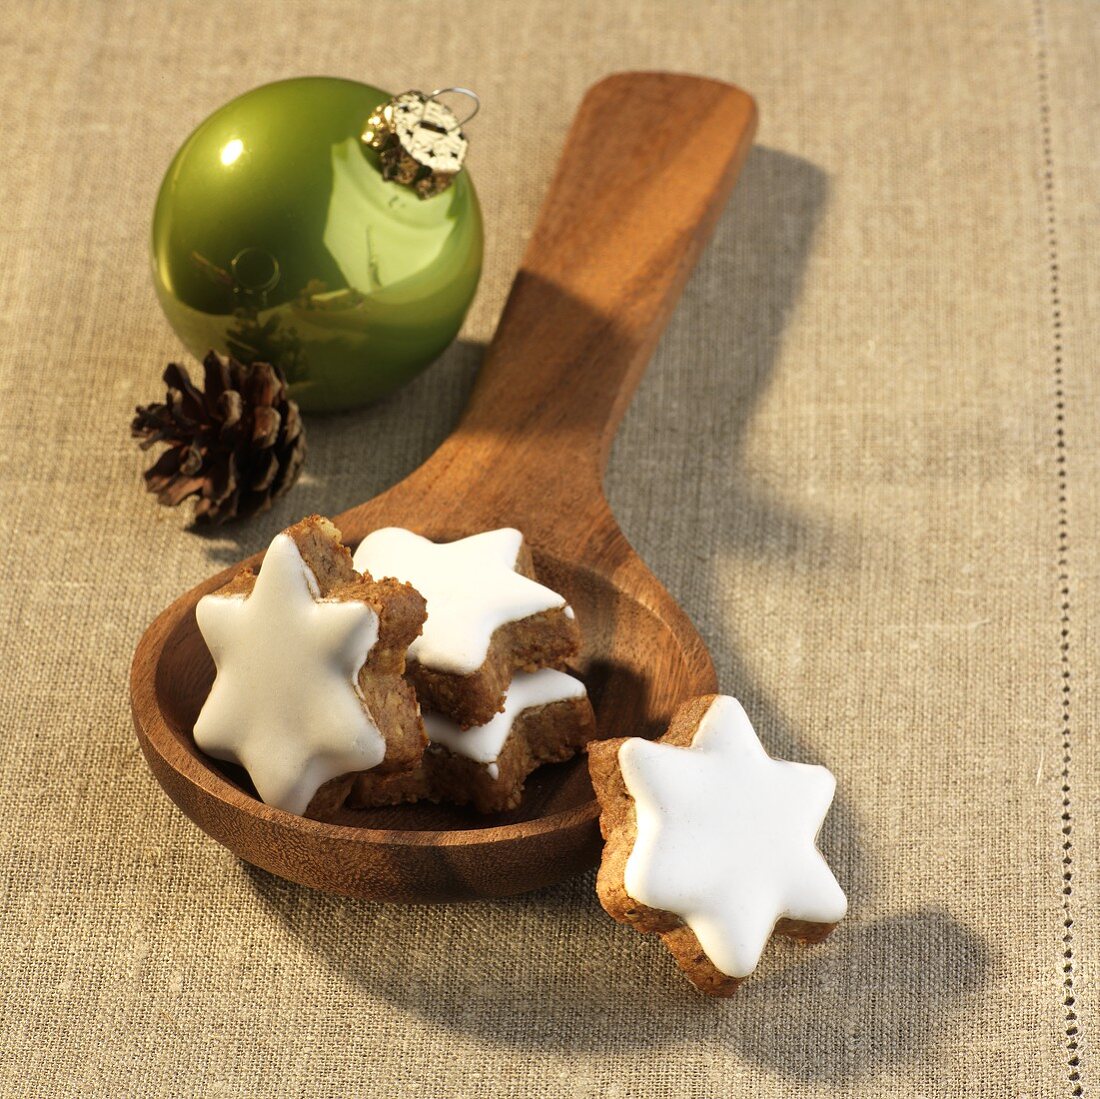 Cinnamon stars on a wooden spoon and Christmas decorations